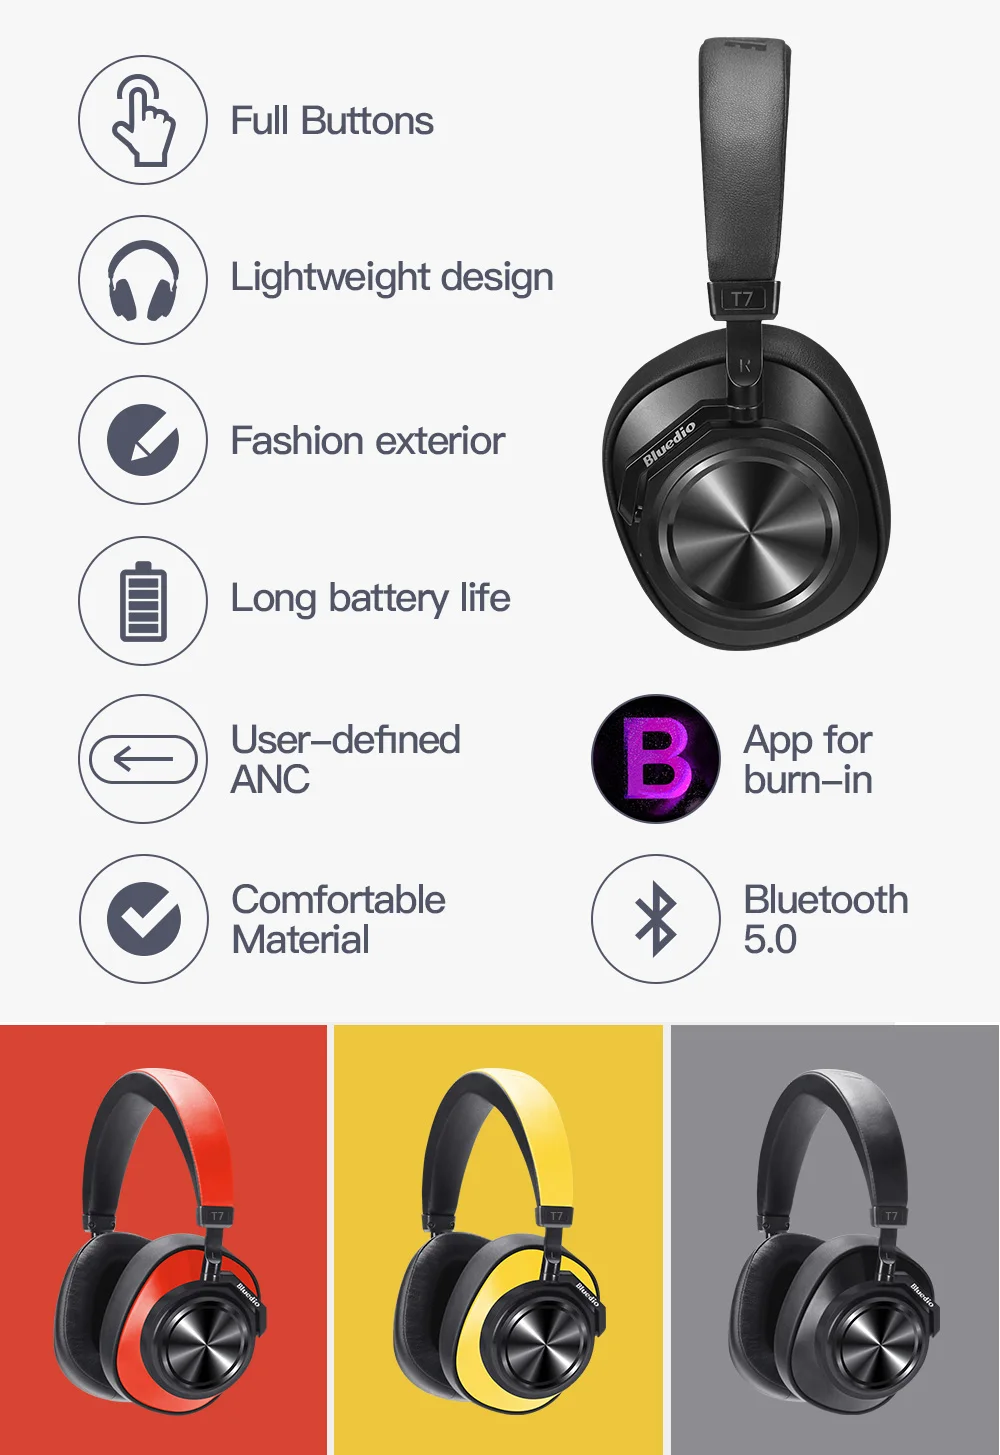 Bluedio T7 Bluetooth Headphones ANC Wireless Headset bluetooth 5.0 HIFI sound with 57mm loudspeaker face recognition for phone